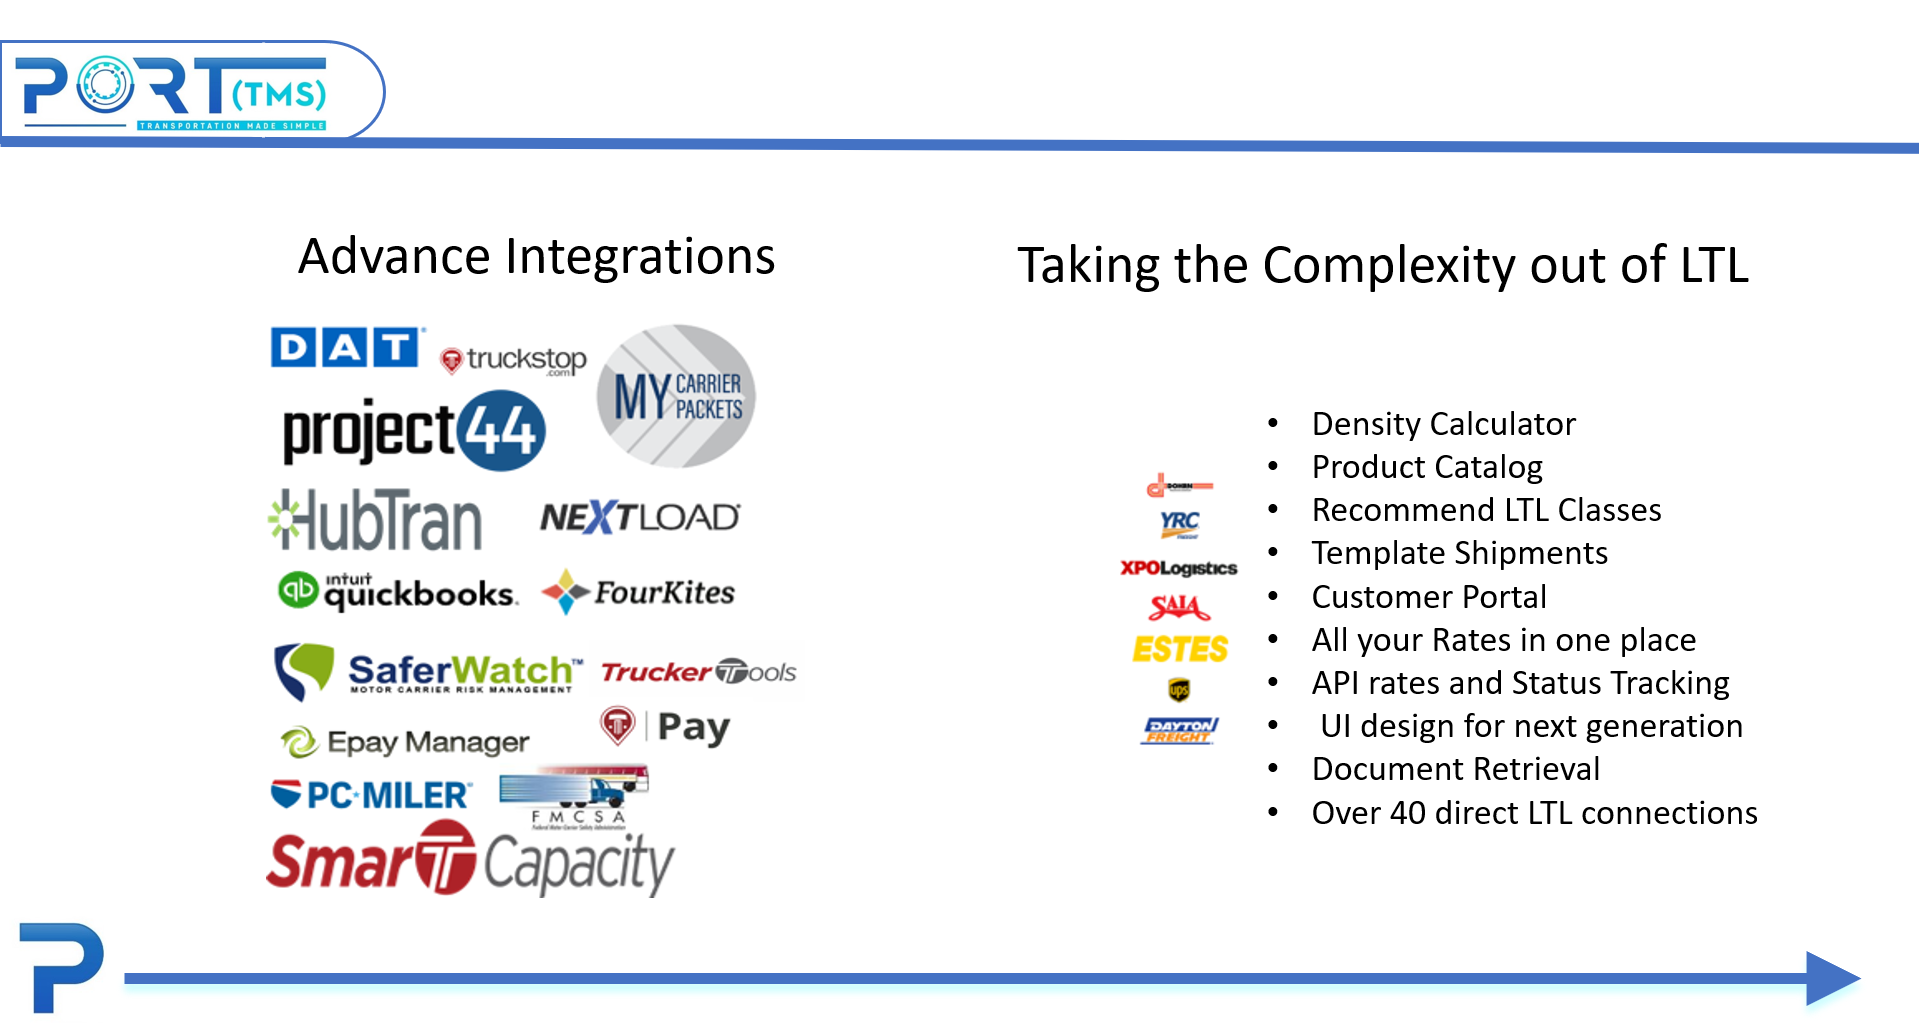 Current Partner Integrations from carrier onboarding to LTL API connections.